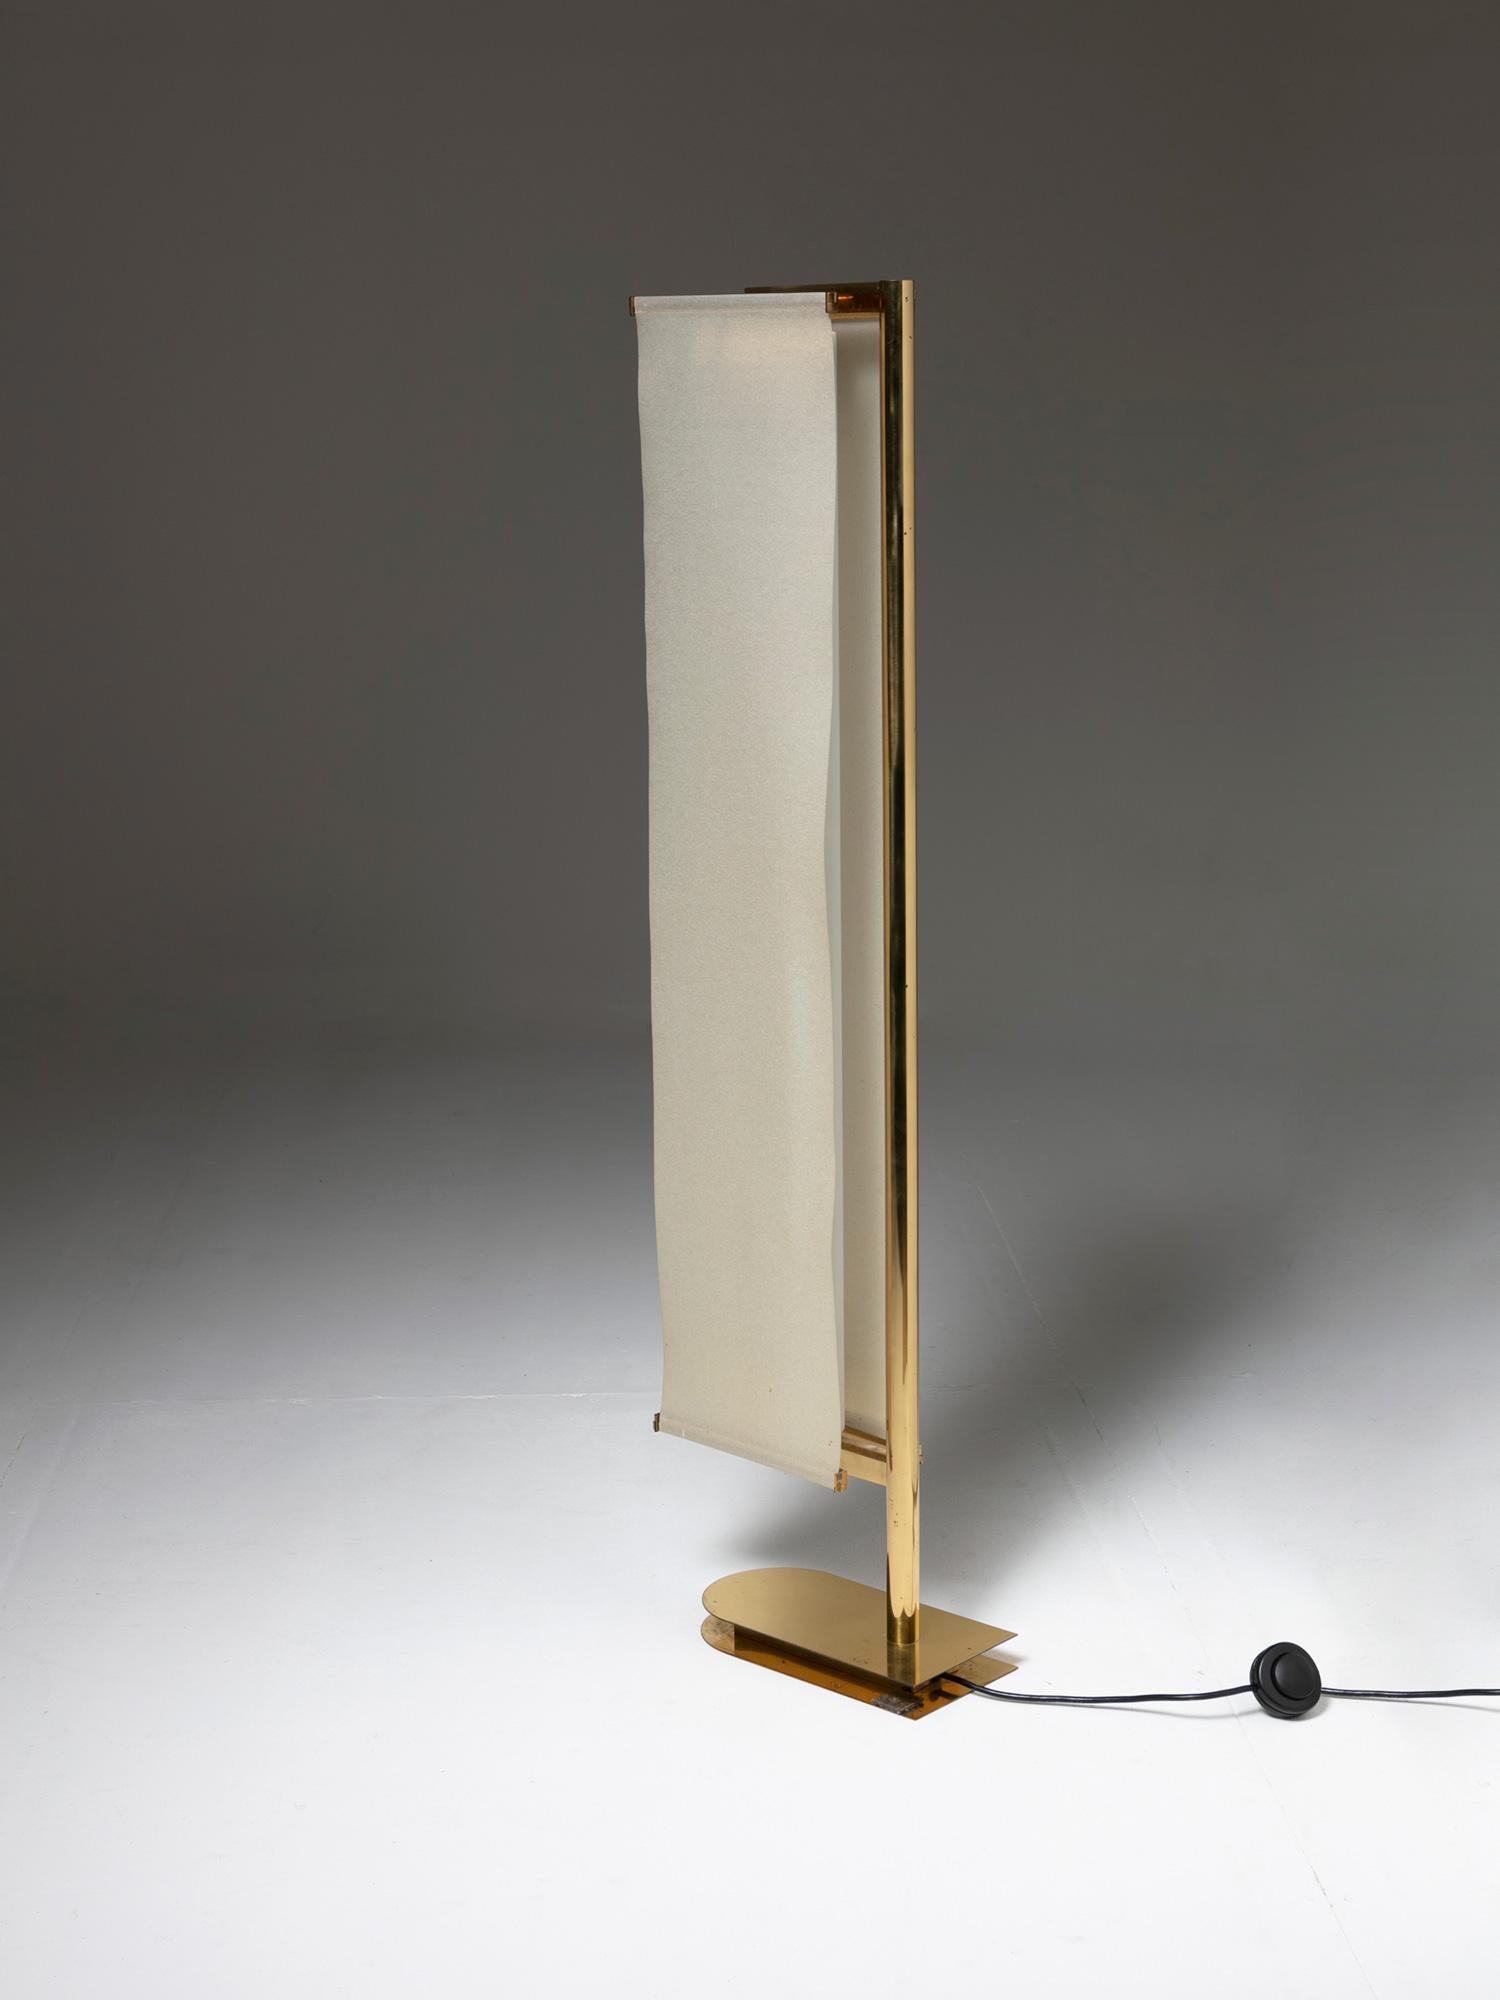 1970s edition floor lamp by Pietro Chiesa for Fontana Arte.
  